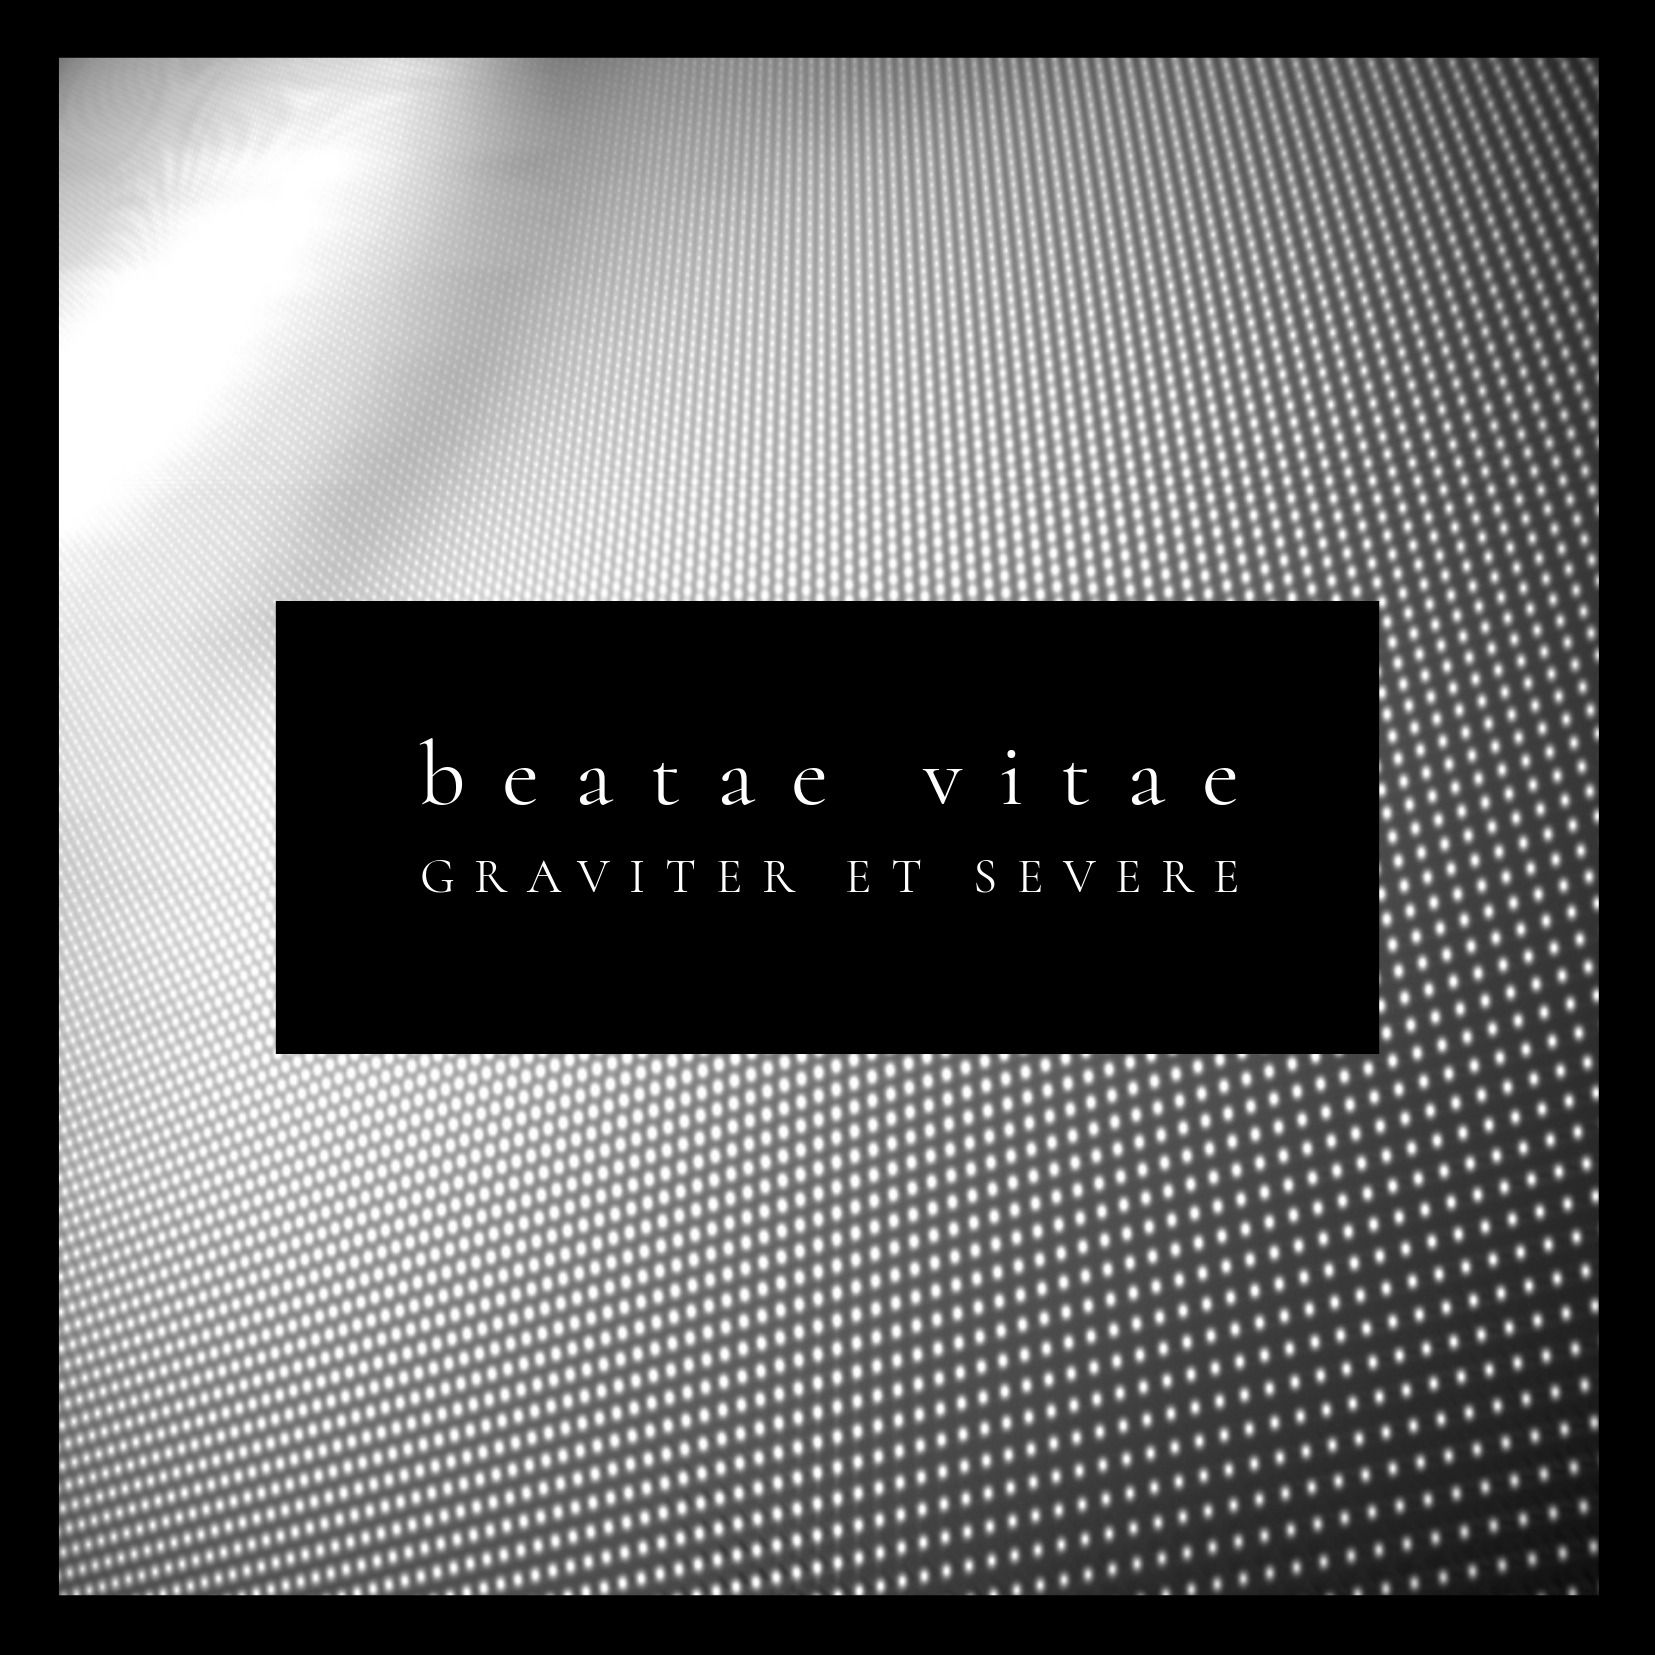 Black and white album pixelated background - Shiny metal surfaces in album cover design - Image